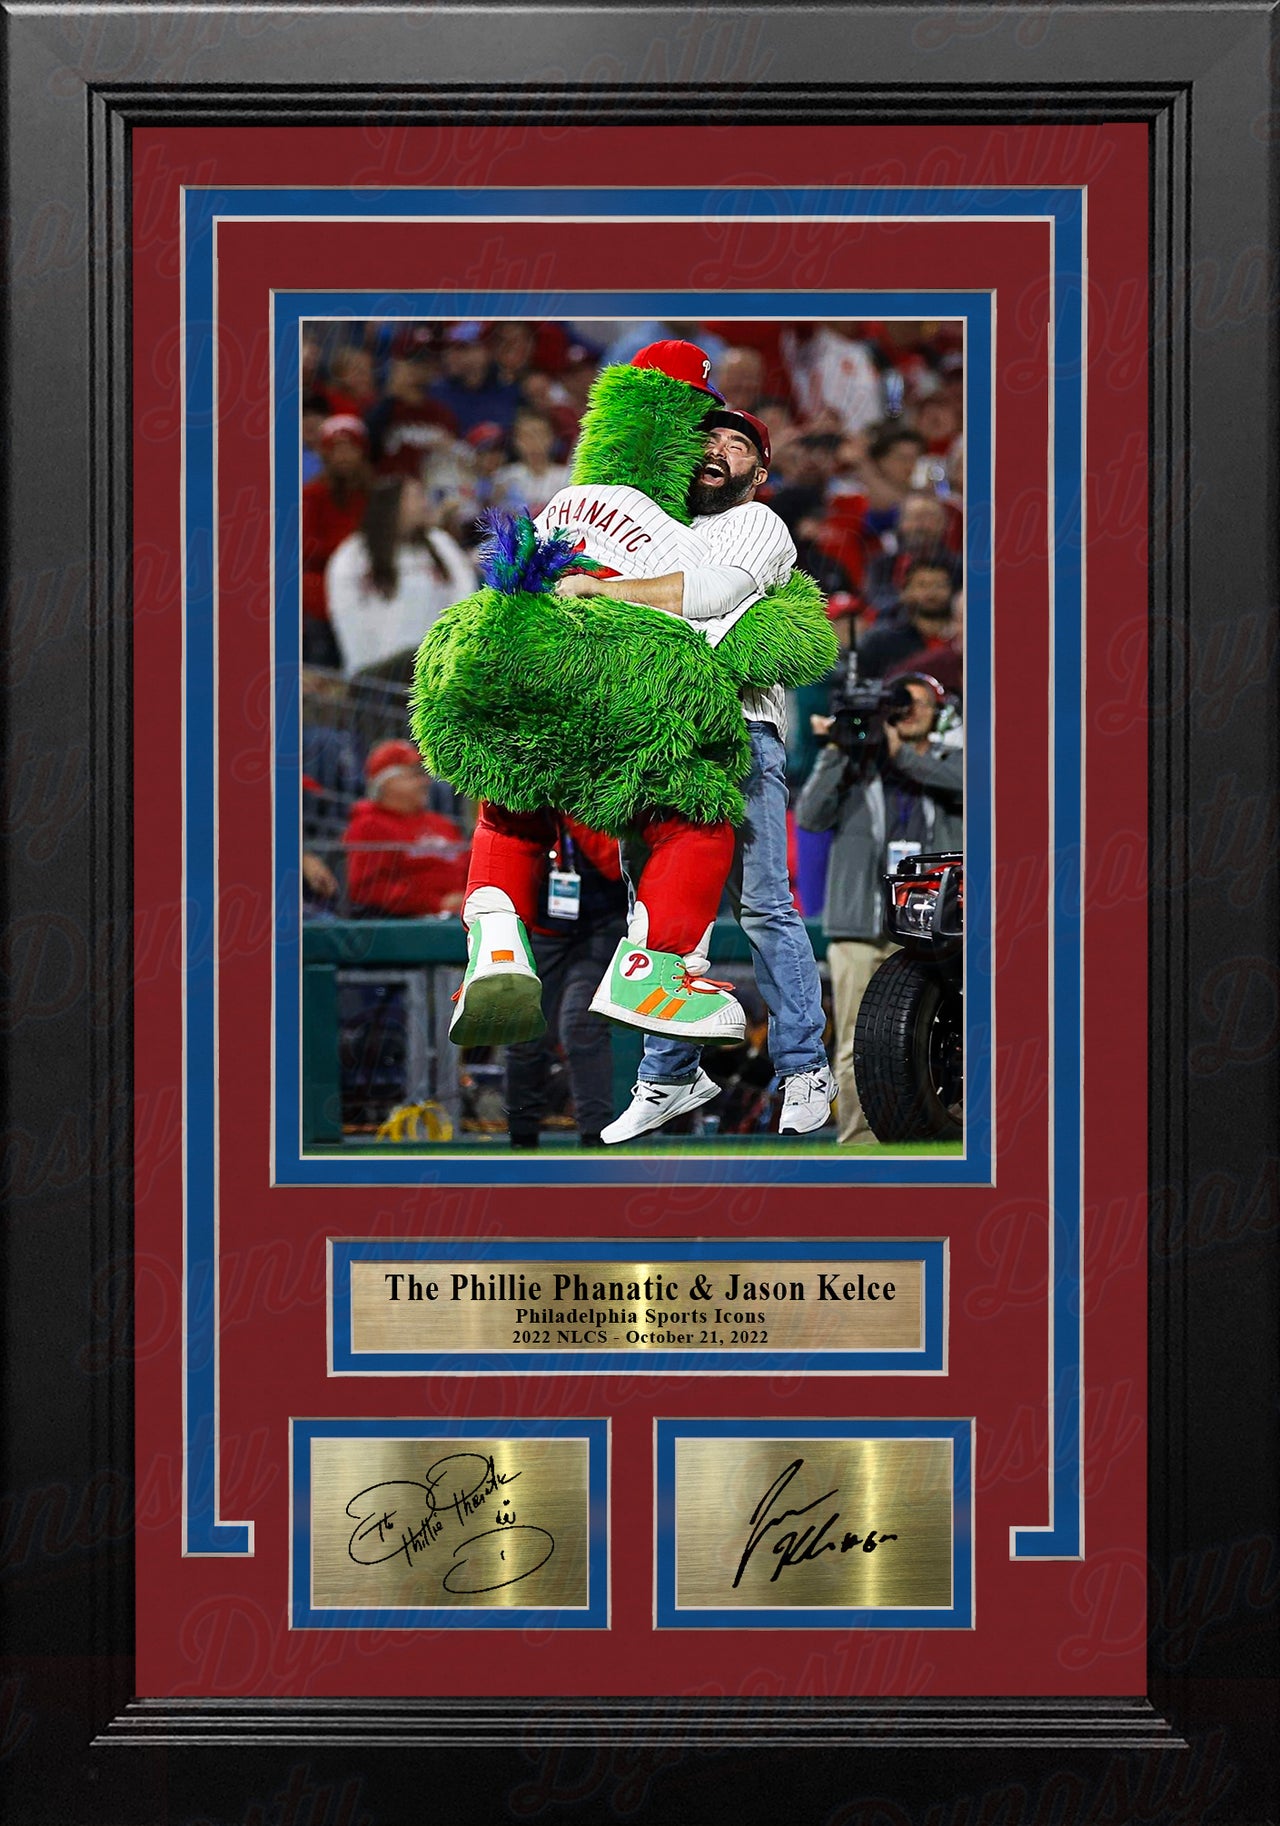 The Phillie Phanatic & Jason Kelce Rally the Phillies Framed Baseball Photo with Engraved Autographs - Dynasty Sports & Framing 